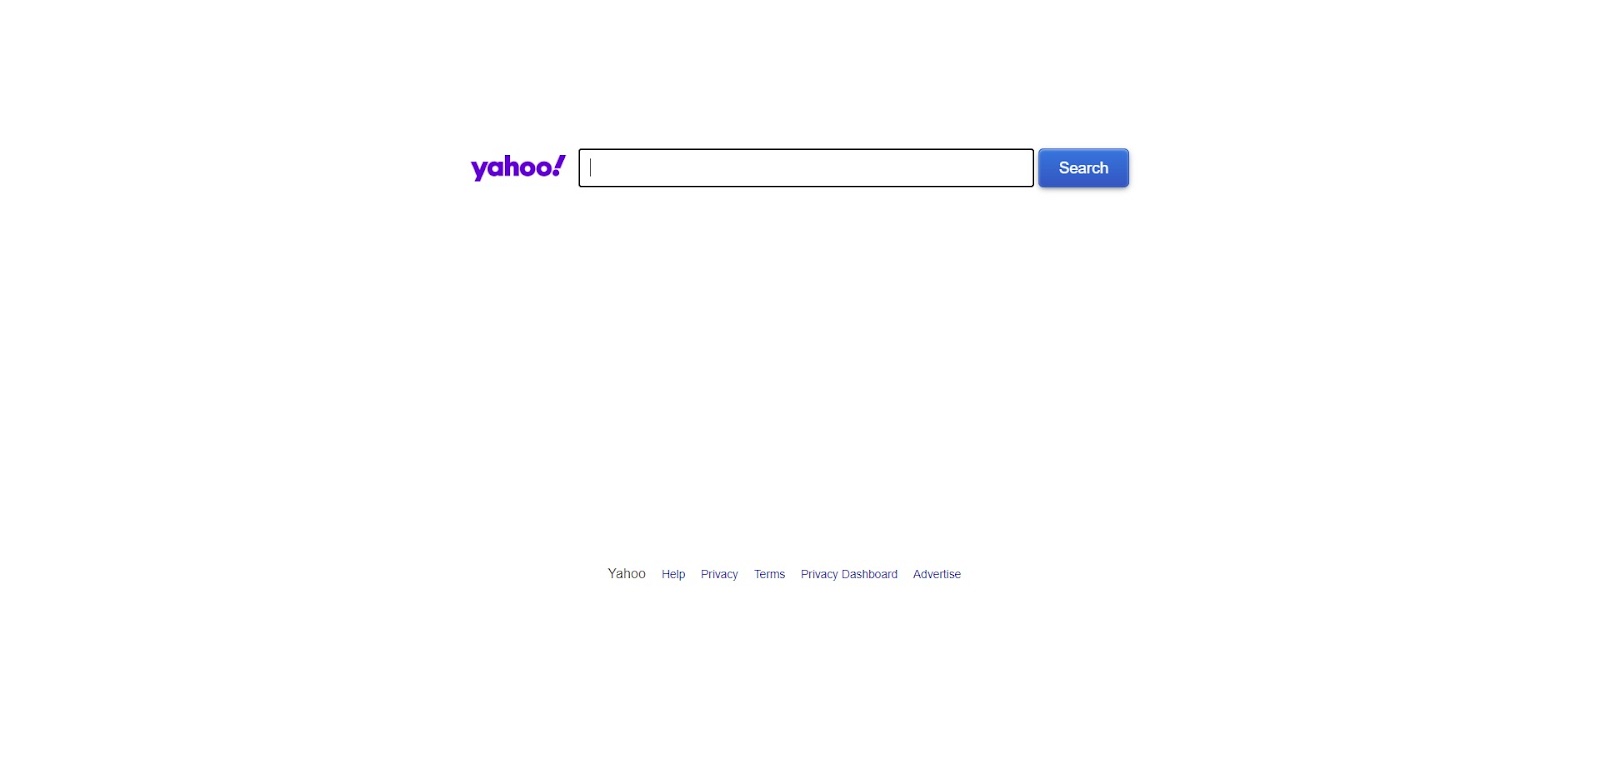 A screenshot of Yahoo Image Search's website